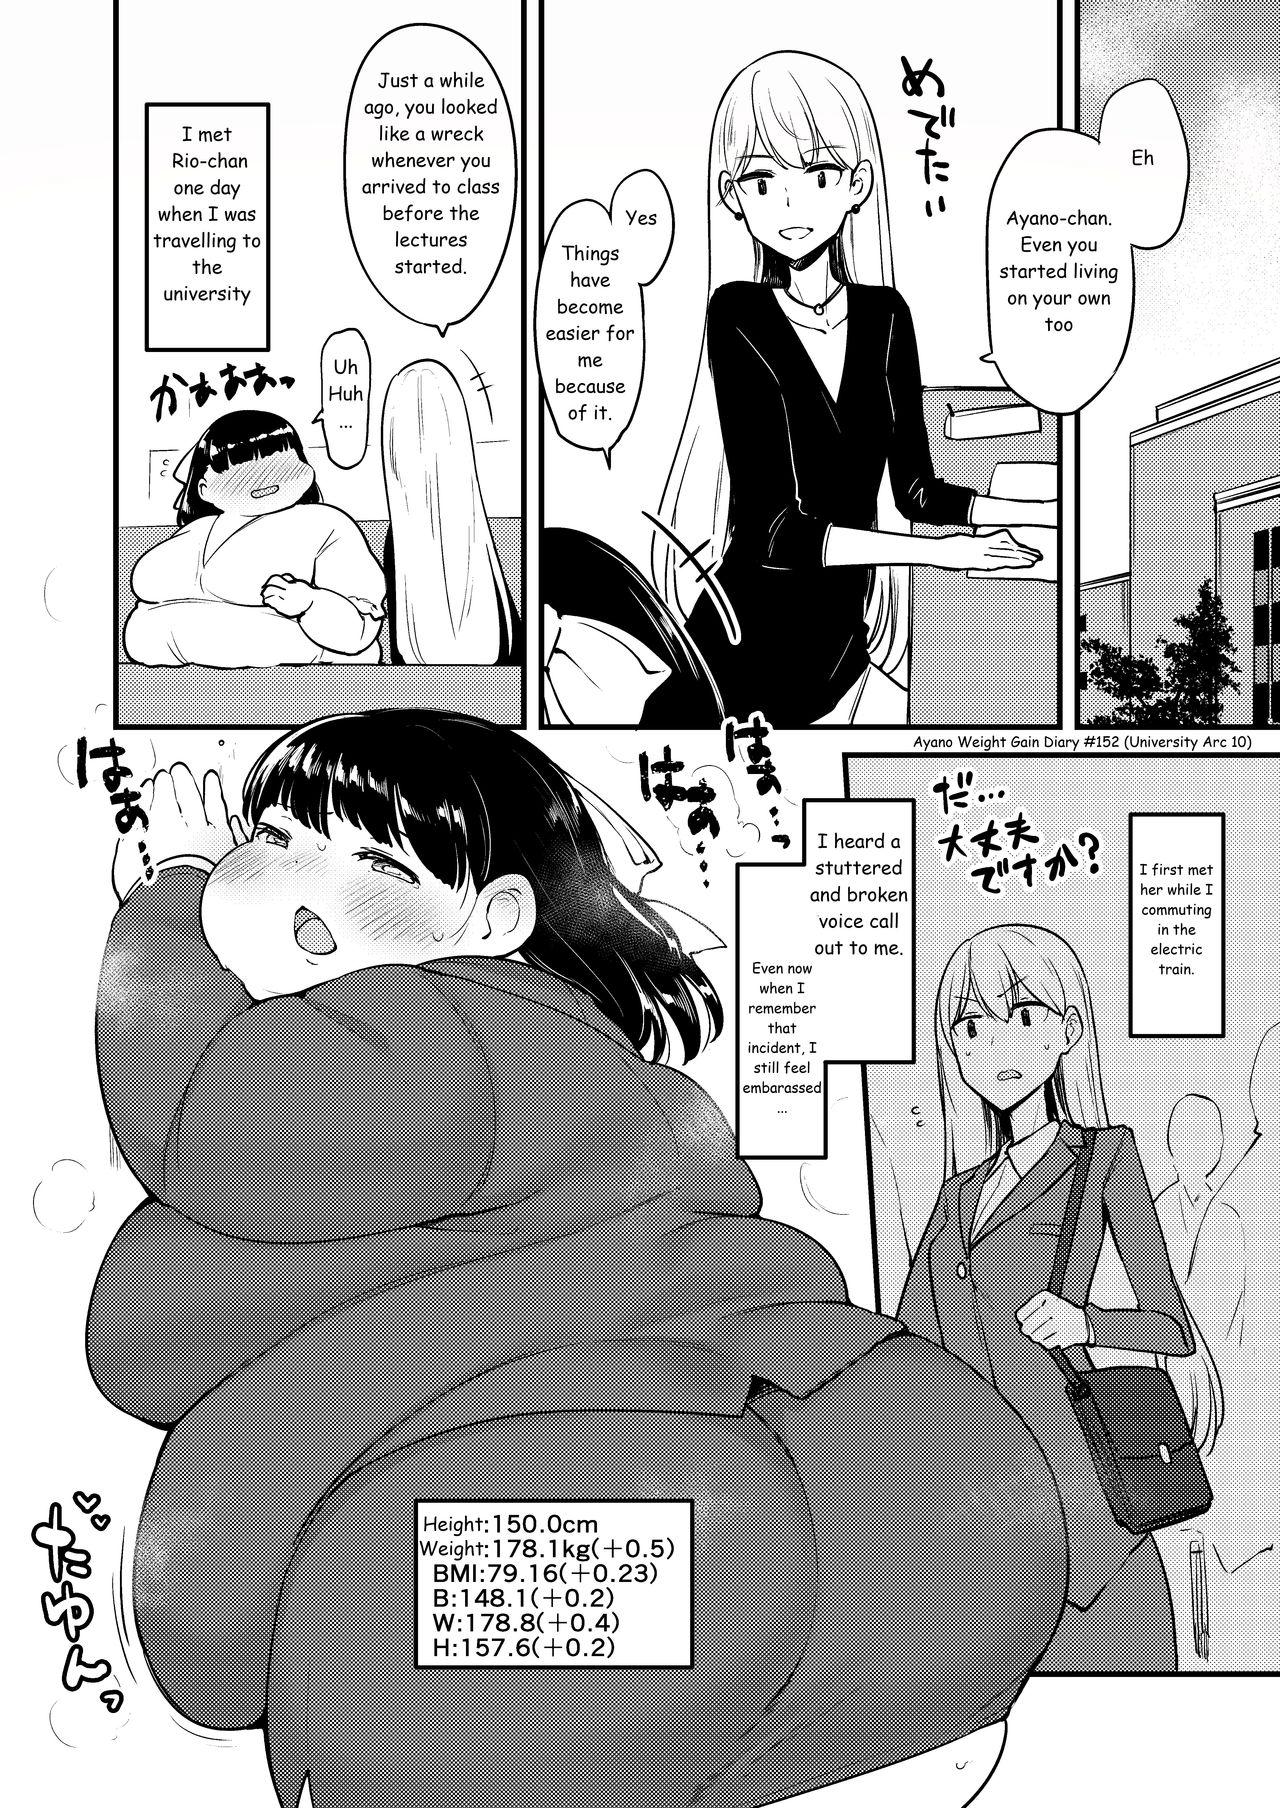 Ayano's Weight Gain Diary [English] Torrent(181 pages) 151